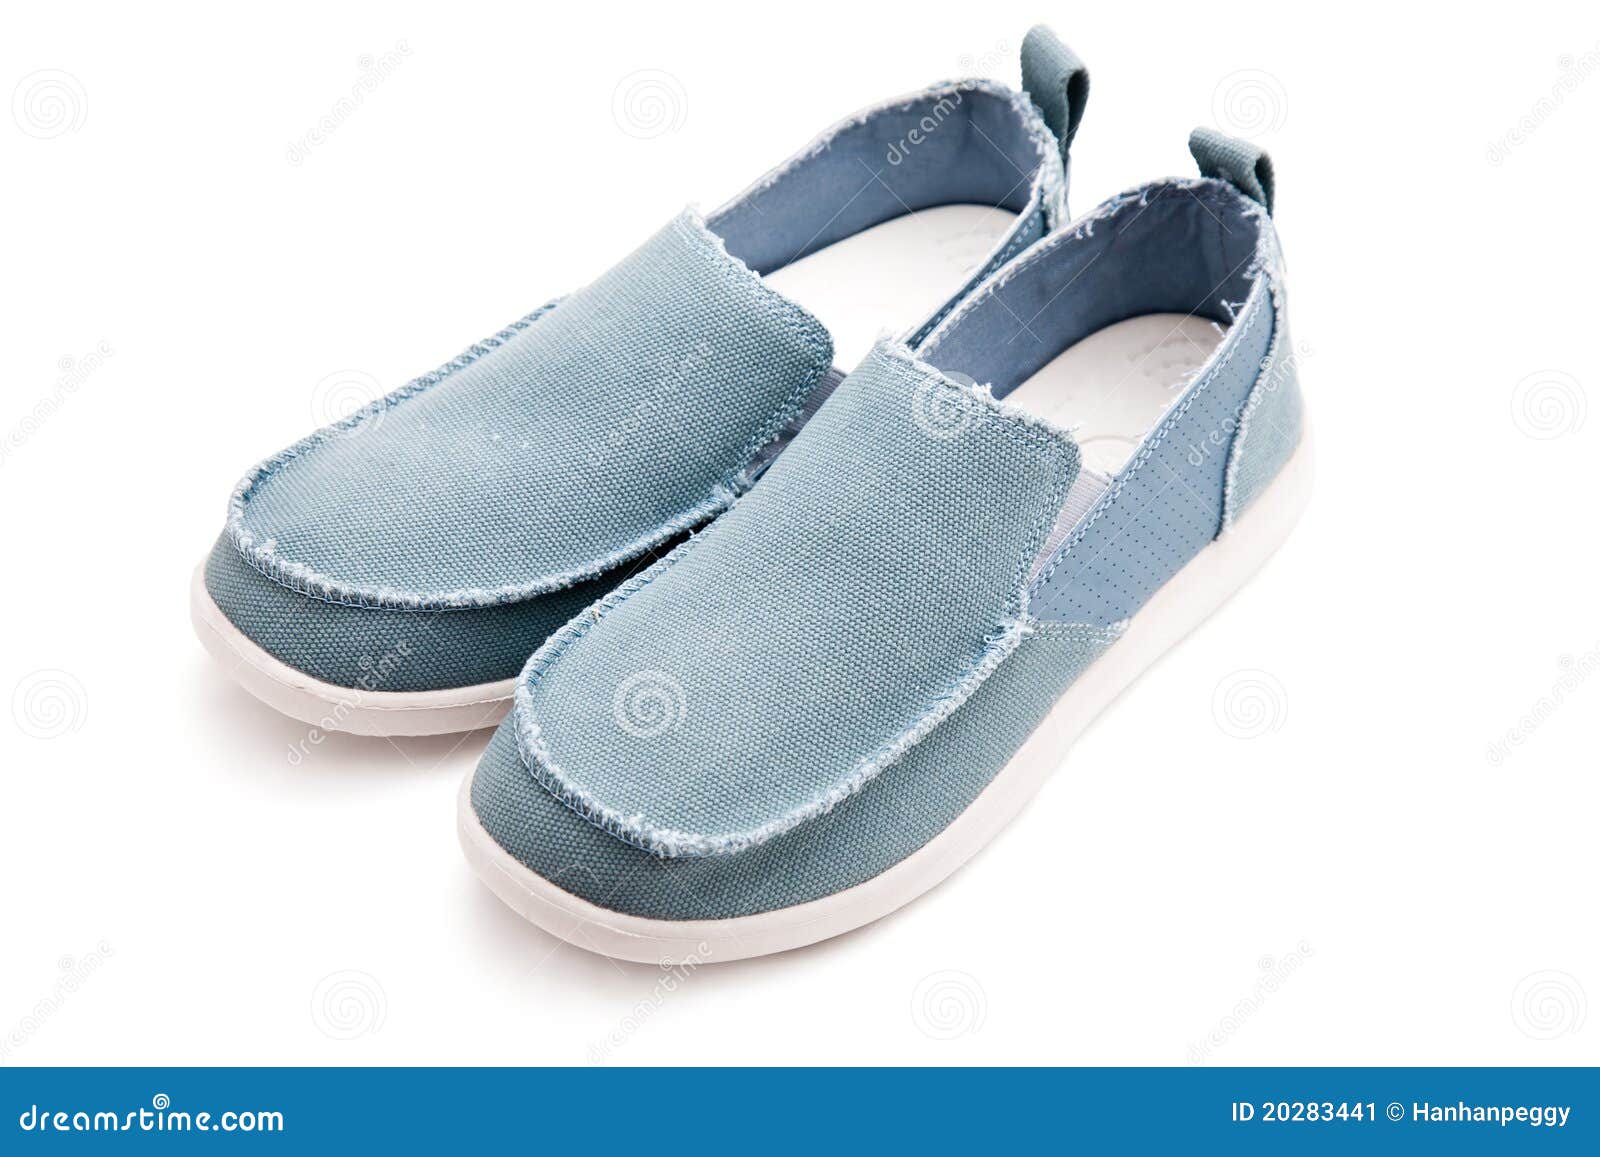 man's casual shoes